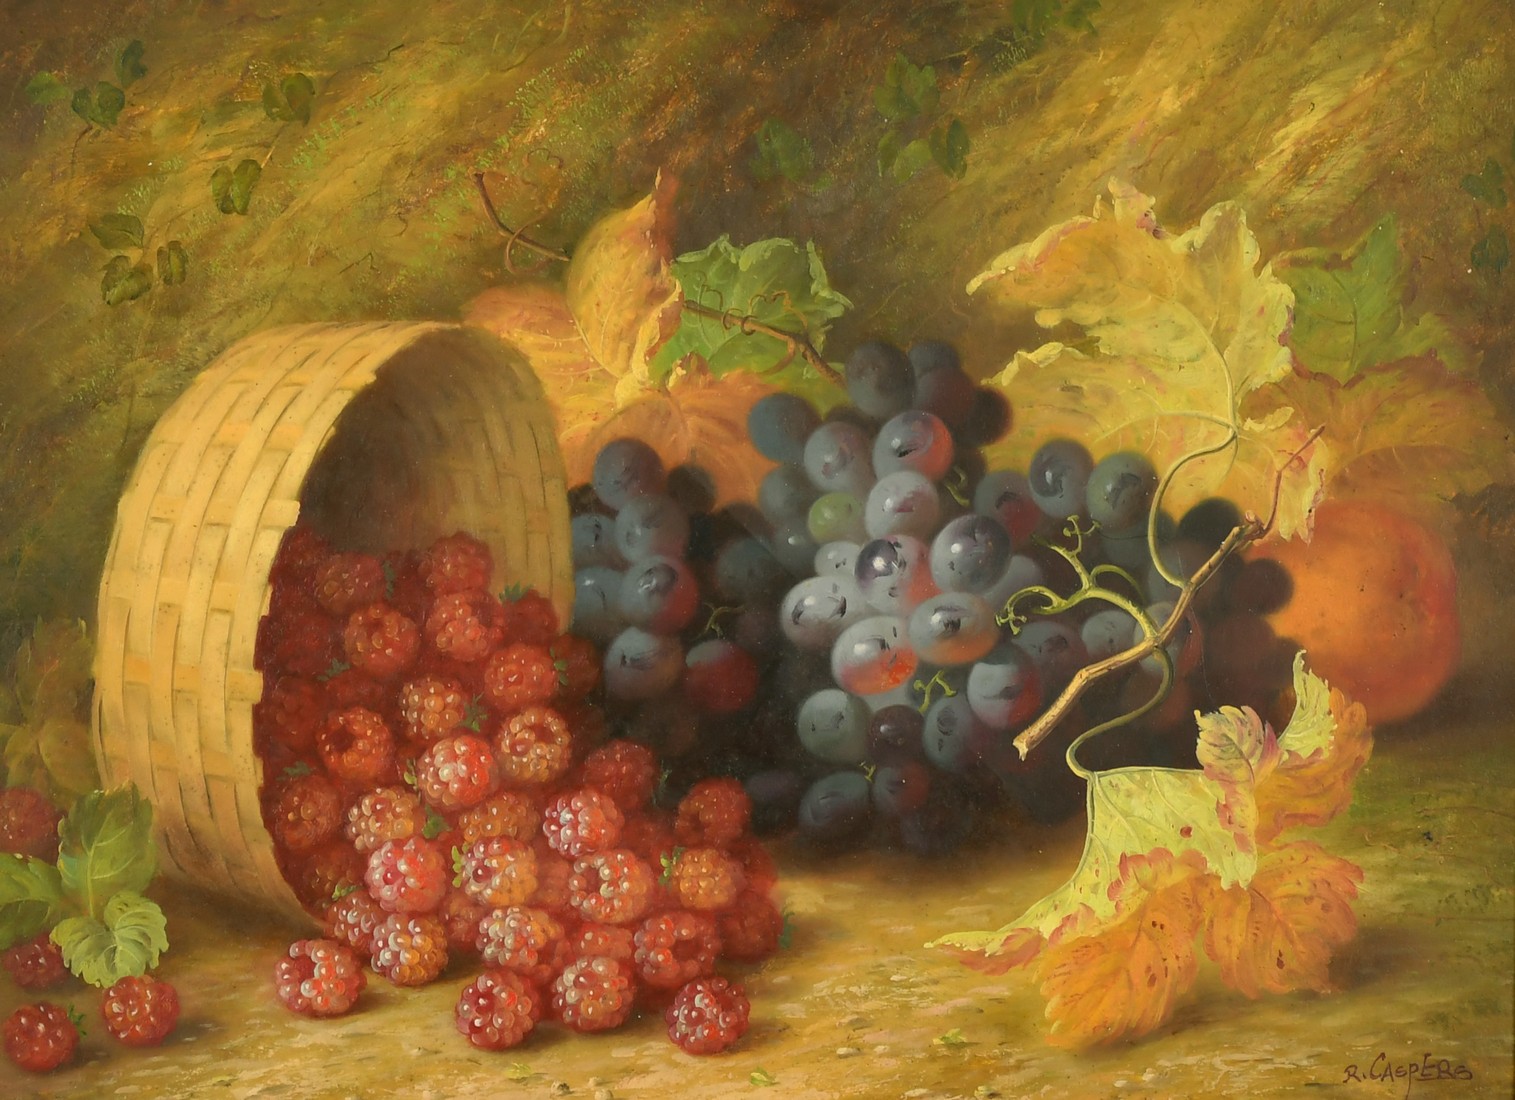 R. Caspers (20th Century), a still life of grapes and raspberries, oil on panel, signed, 12" x 16".